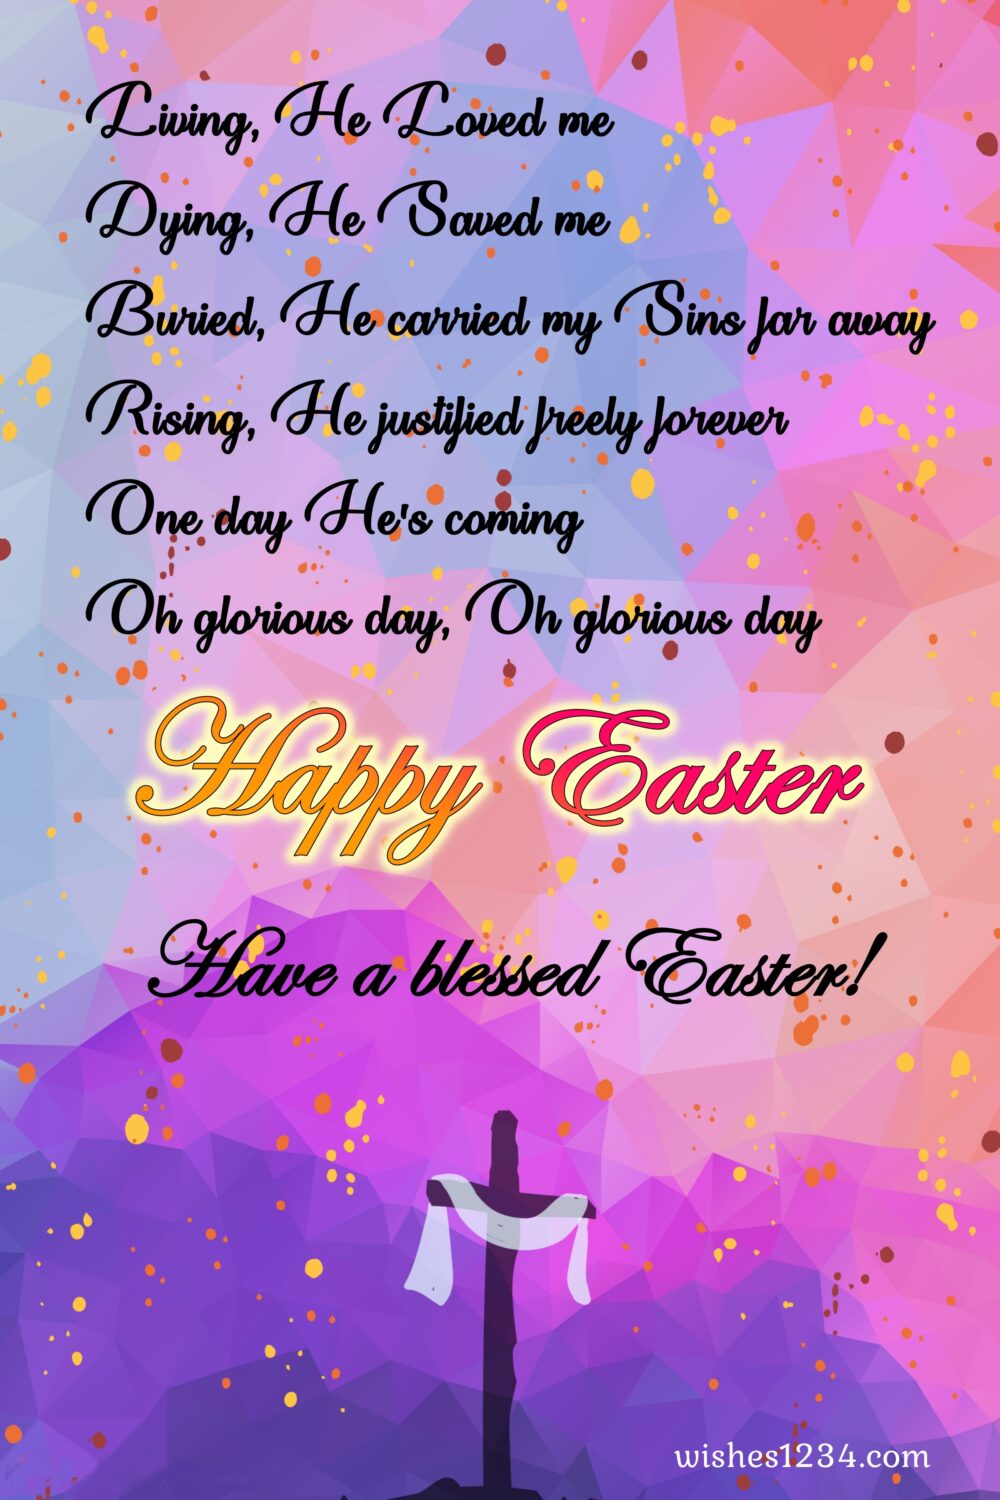 Cross with white clothe, Happy Easter Wishes, Quotes & Images.